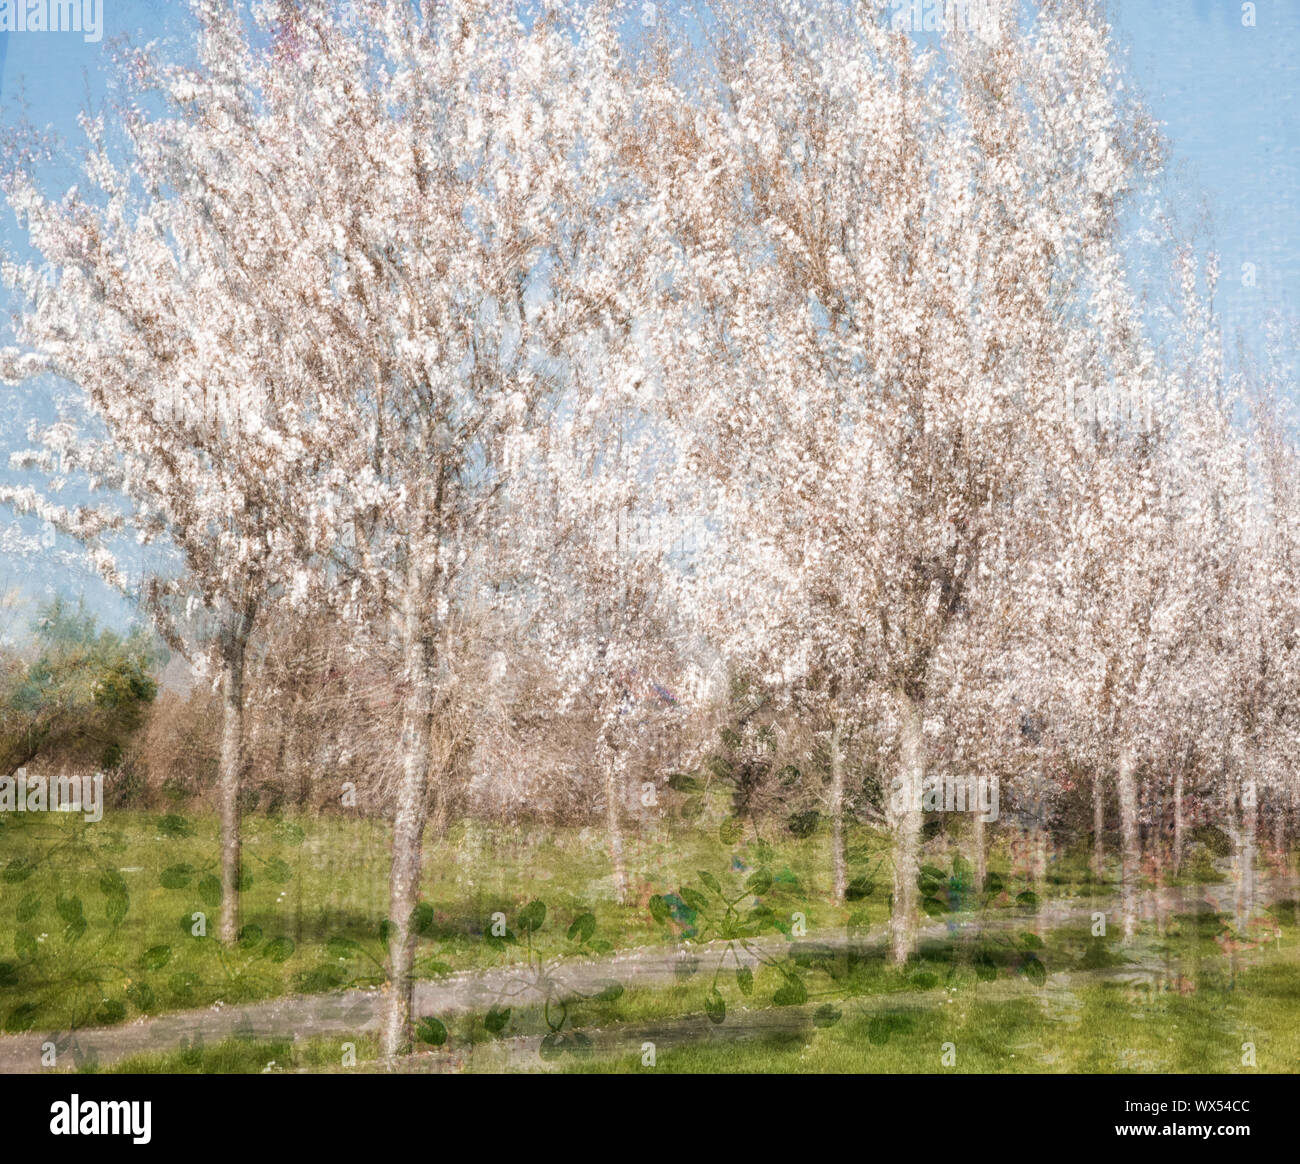 A multiple exposure shot of cherry trees in blossom Stock Photo